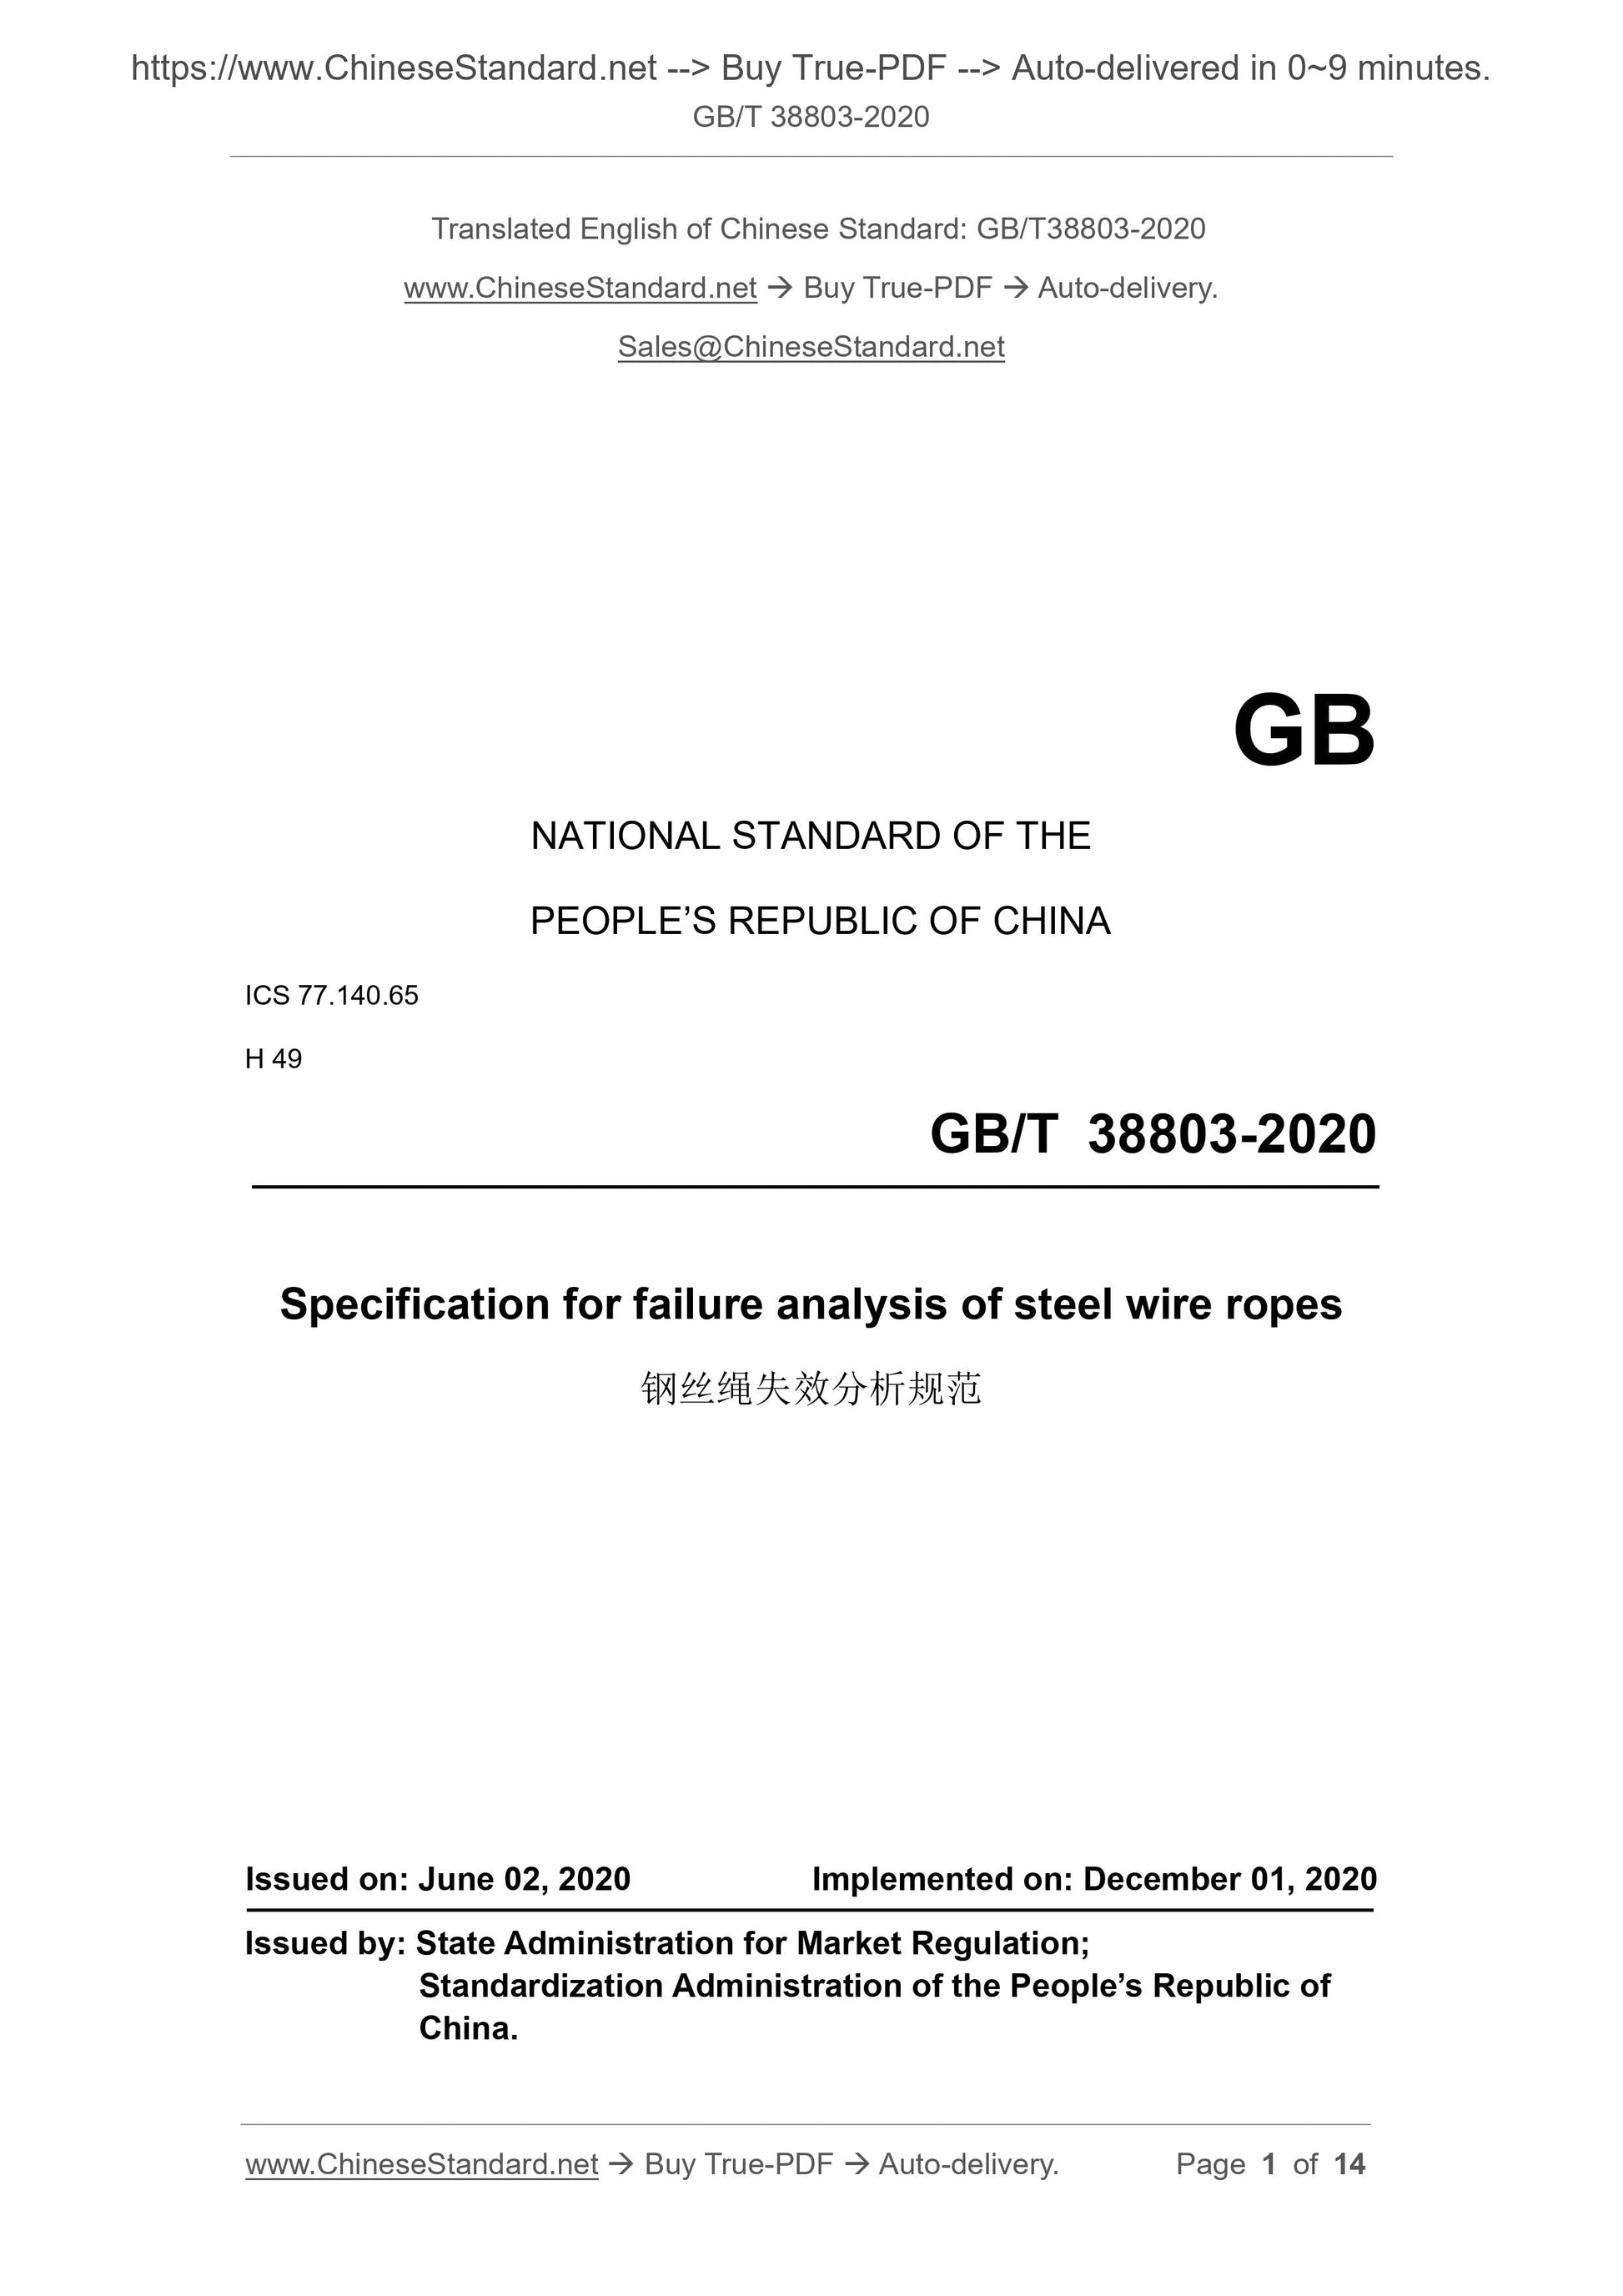 GB/T 38803-2020 Page 1